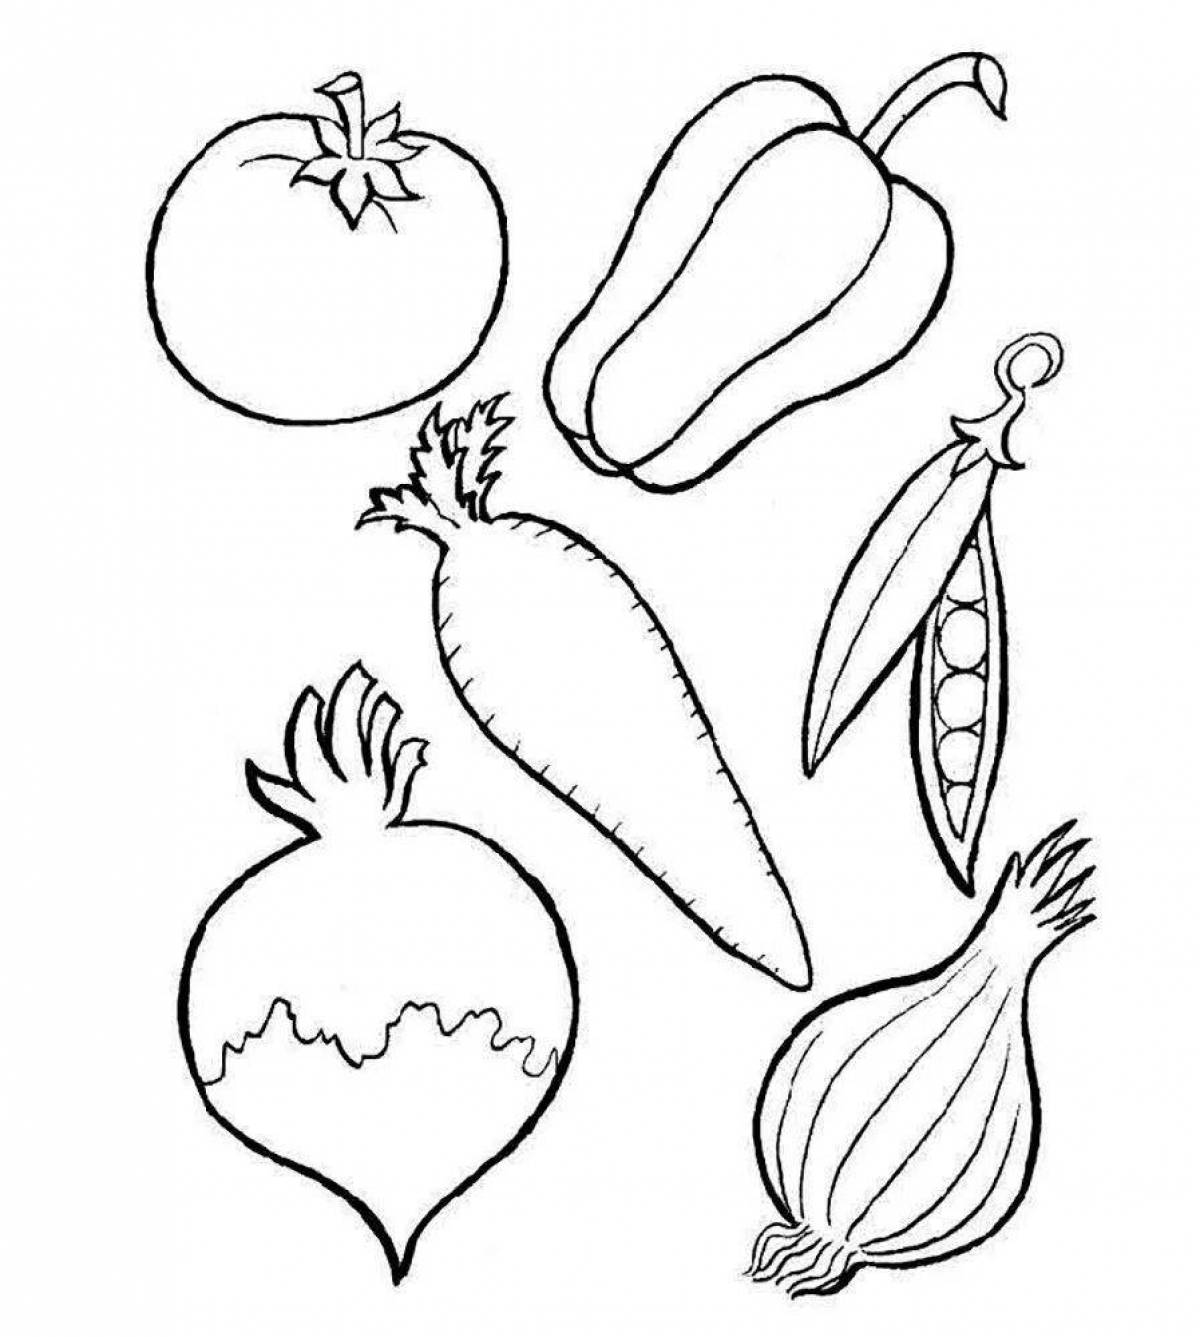 Fun coloring of vegetables for children 3-4 years old